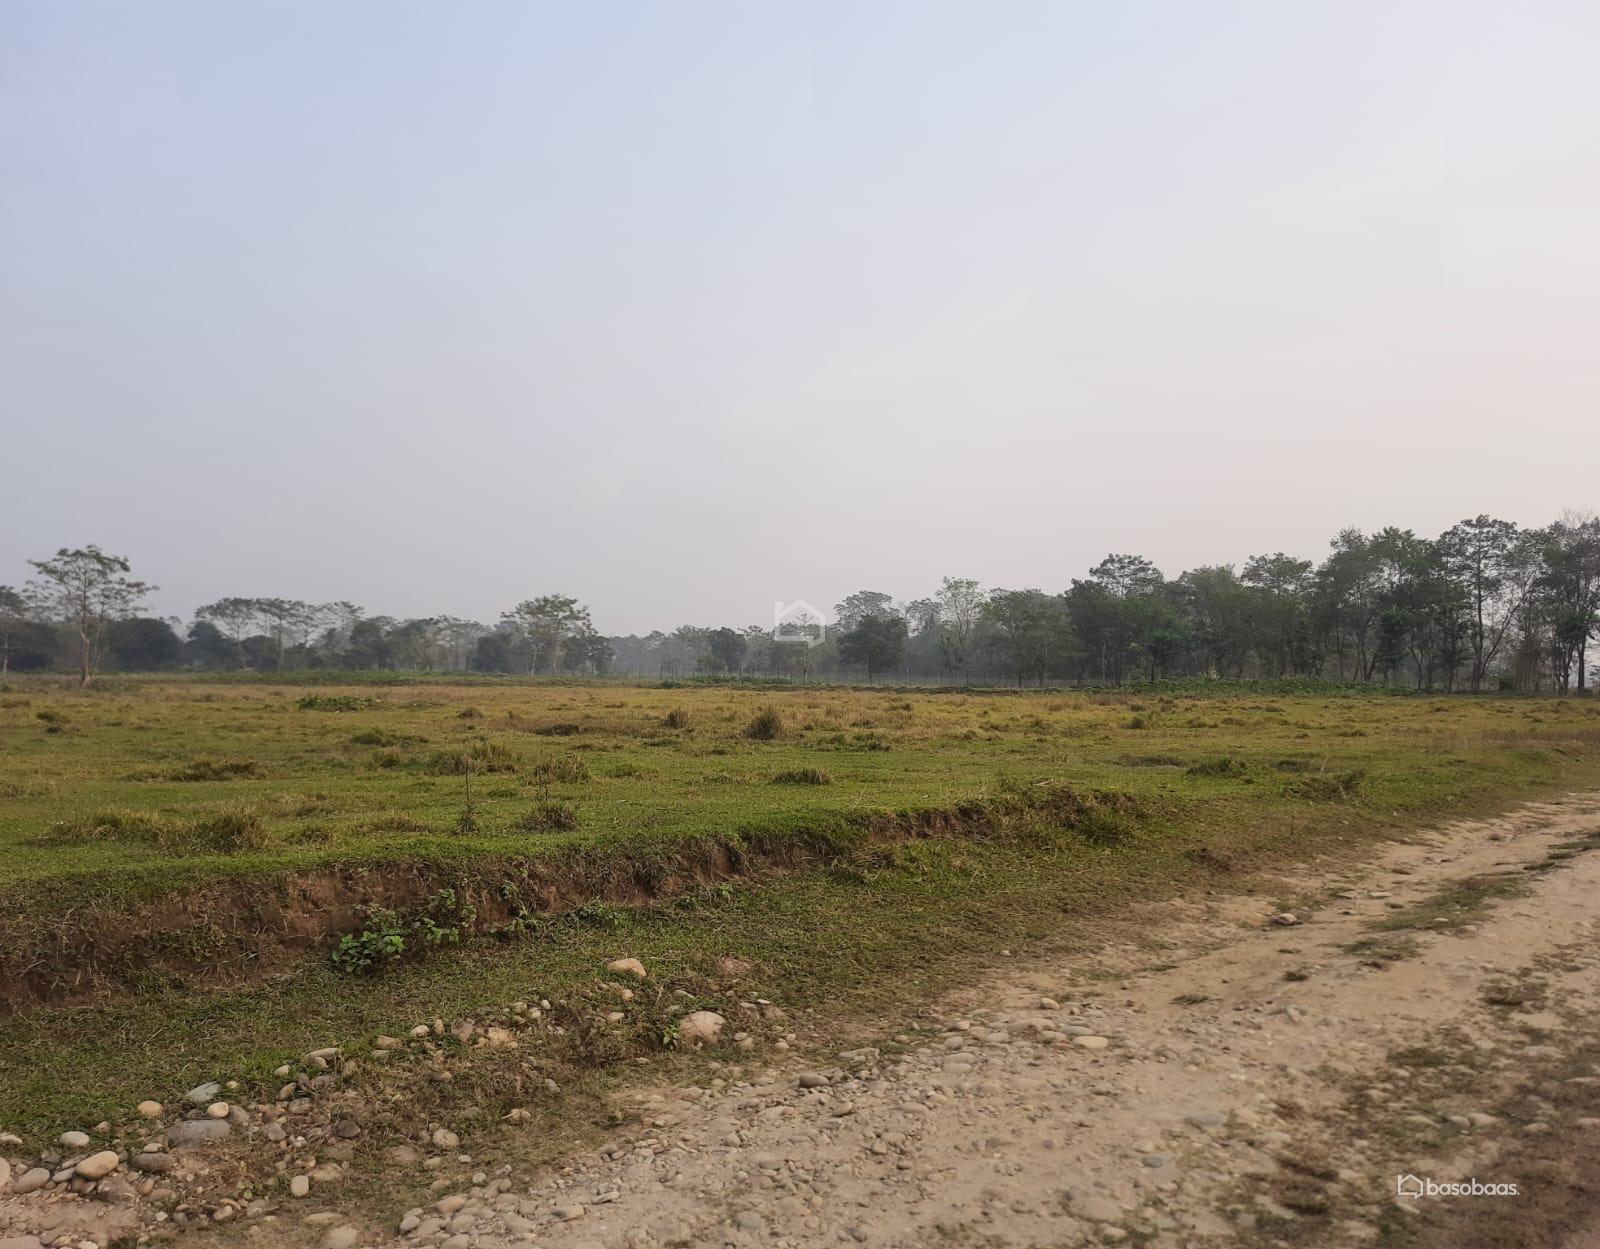 Commercial or Agriculture Land : Land for Sale in Bharatpur, Chitwan Thumbnail